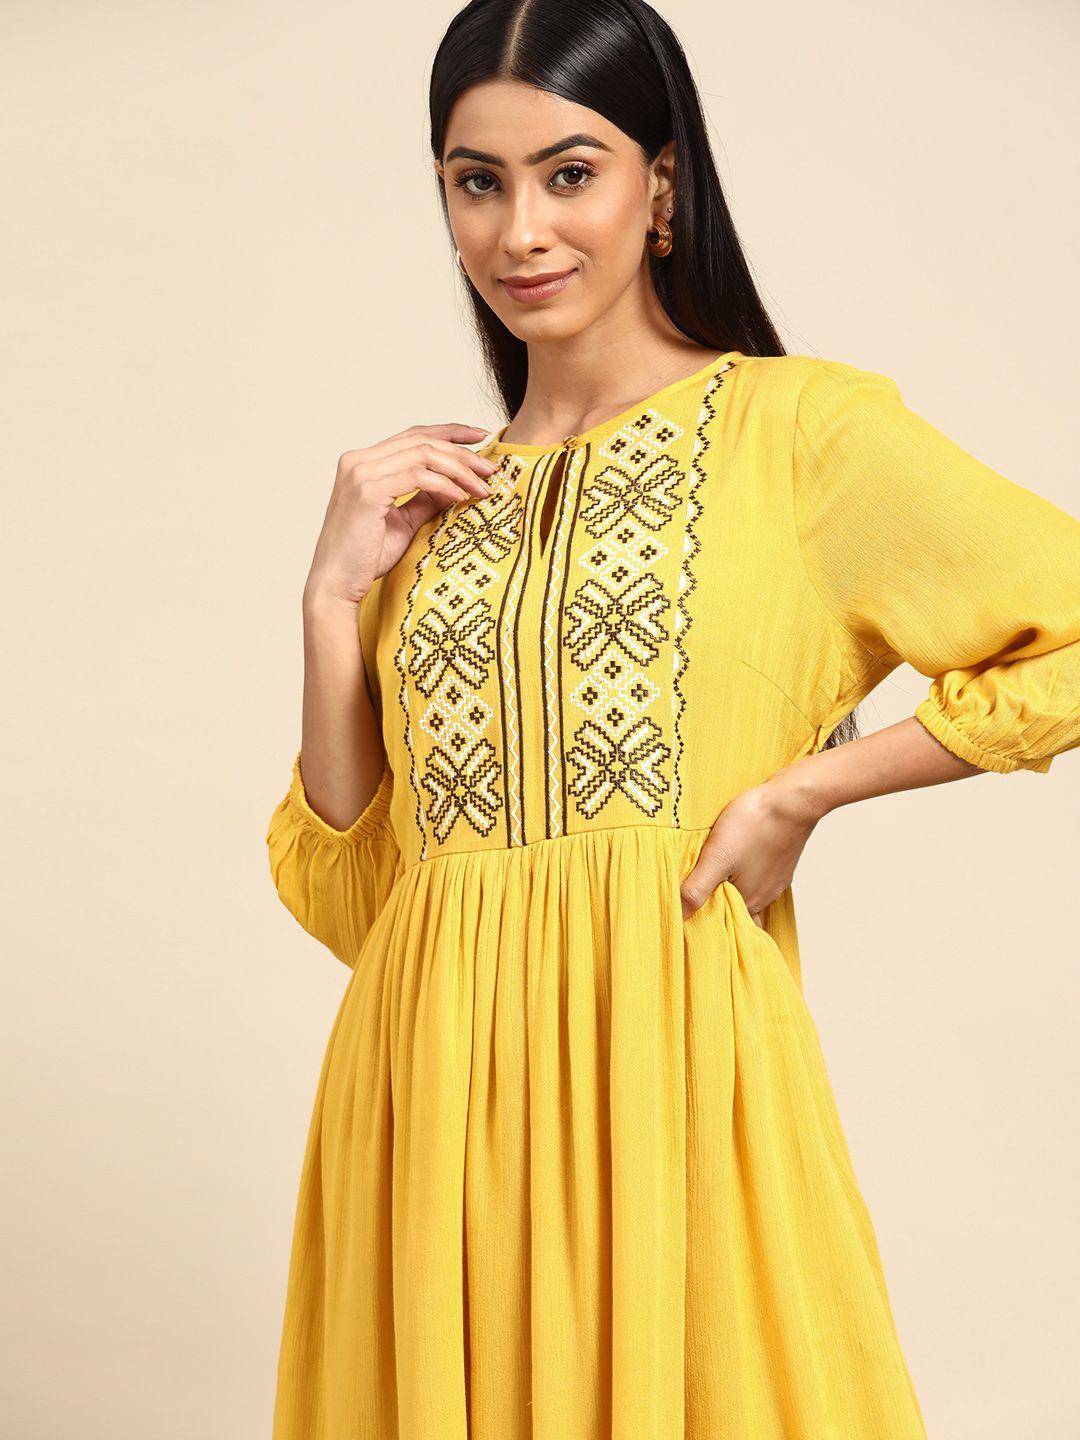 all about you yellow & white ethnic motifs embroidered keyhole neck a-line midi dress